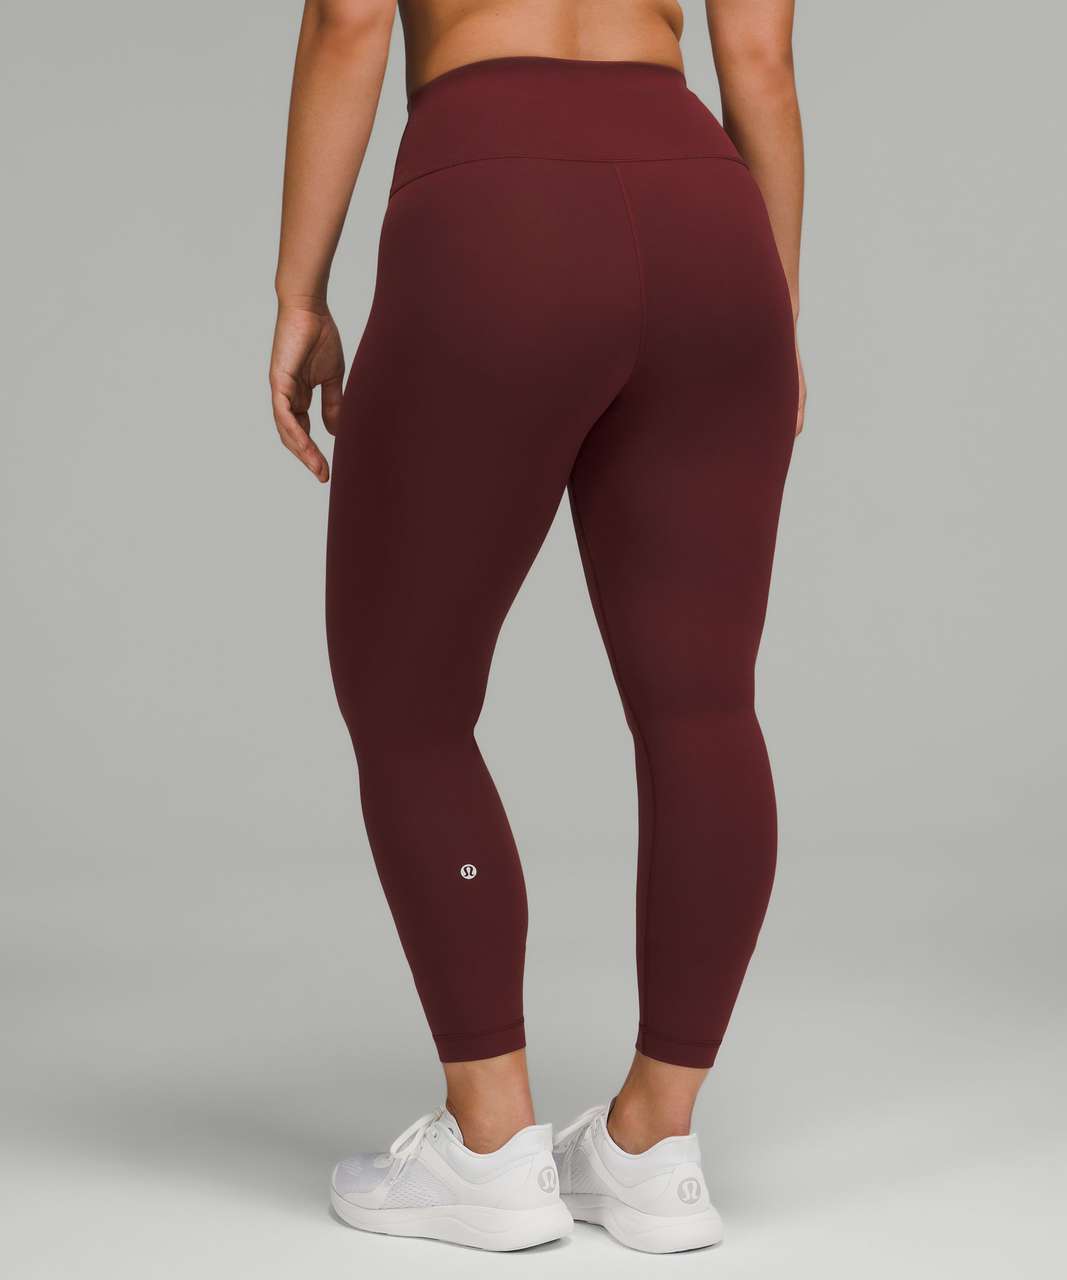 NWT Lululemon Wunder Train Contour Fit High-Rise Tight 25 6